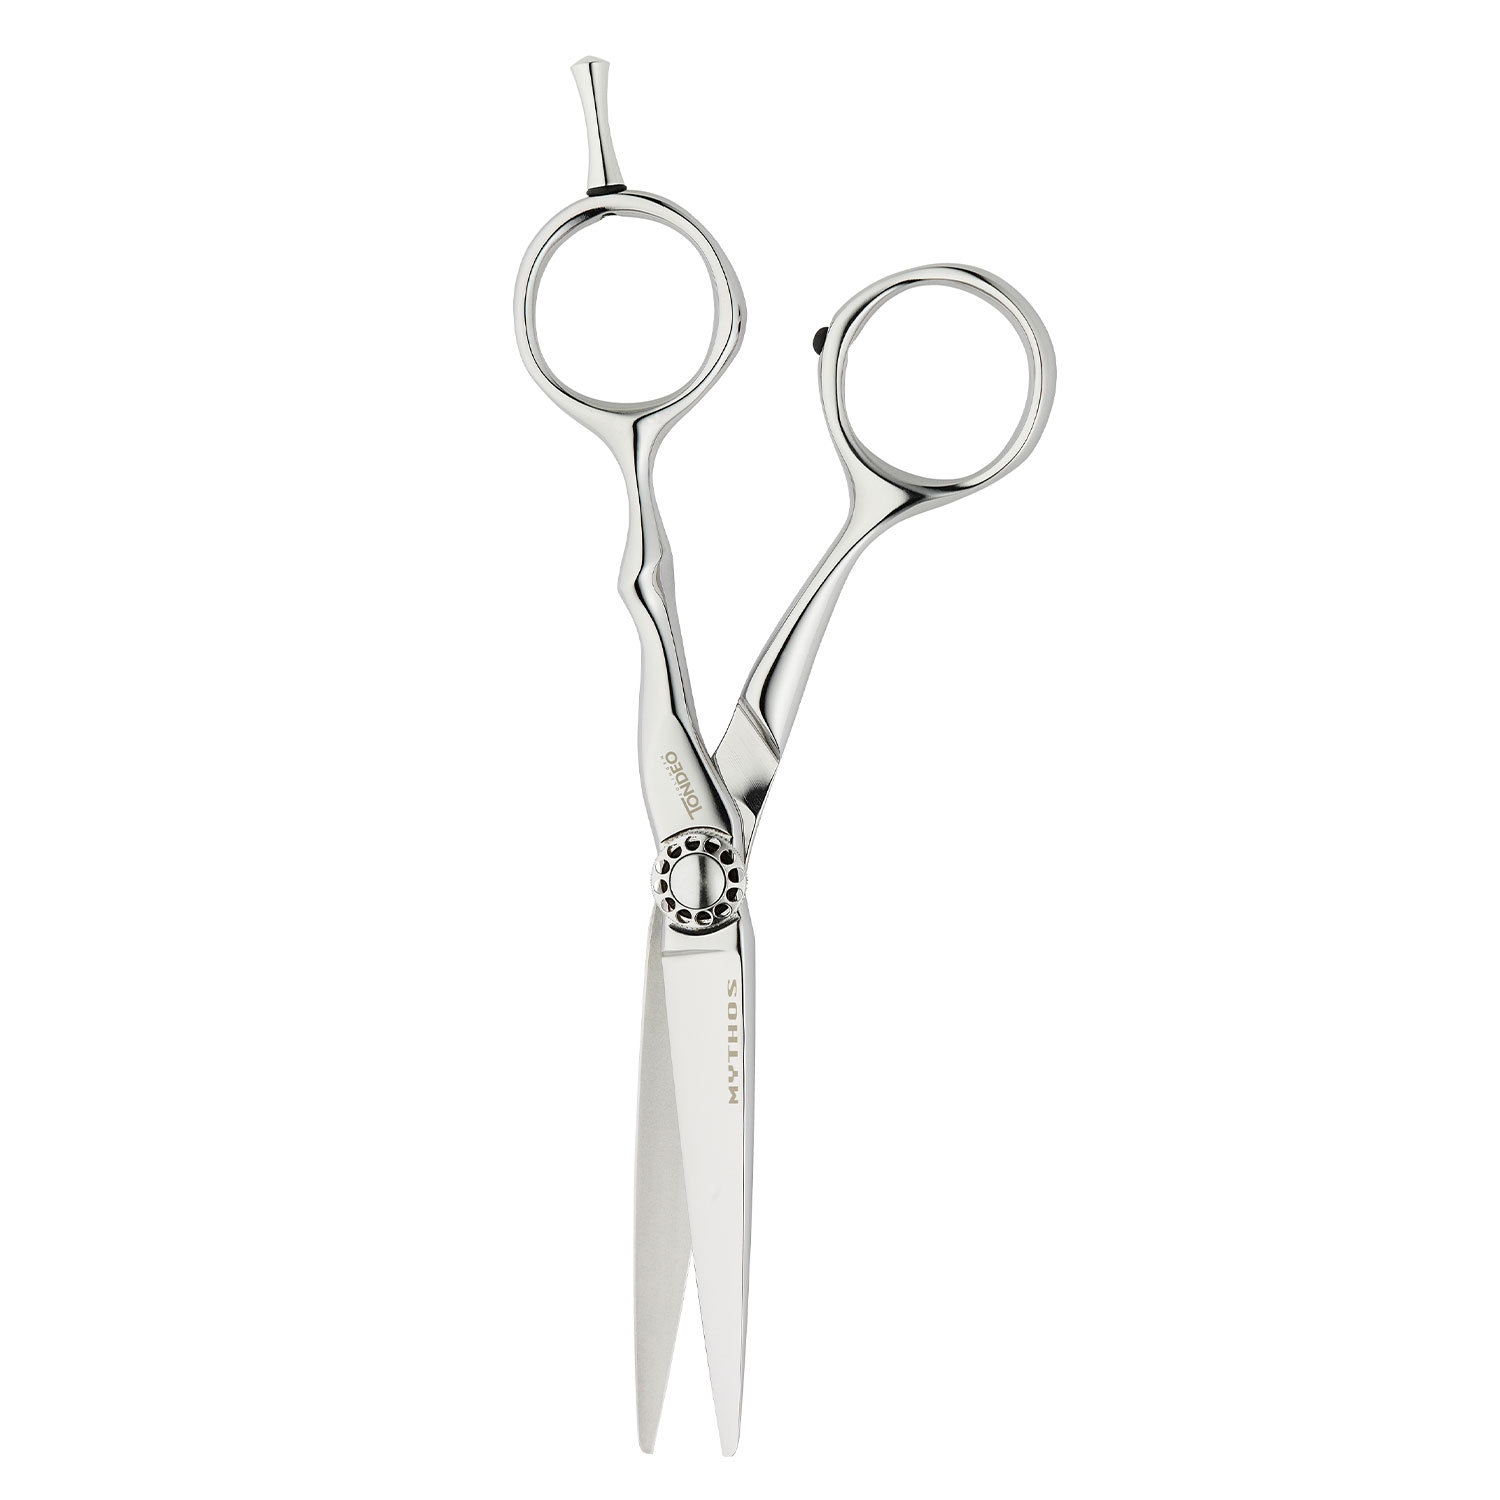 Product image from Tondeo Scissors - Mythos Offset Scissors 5.5"